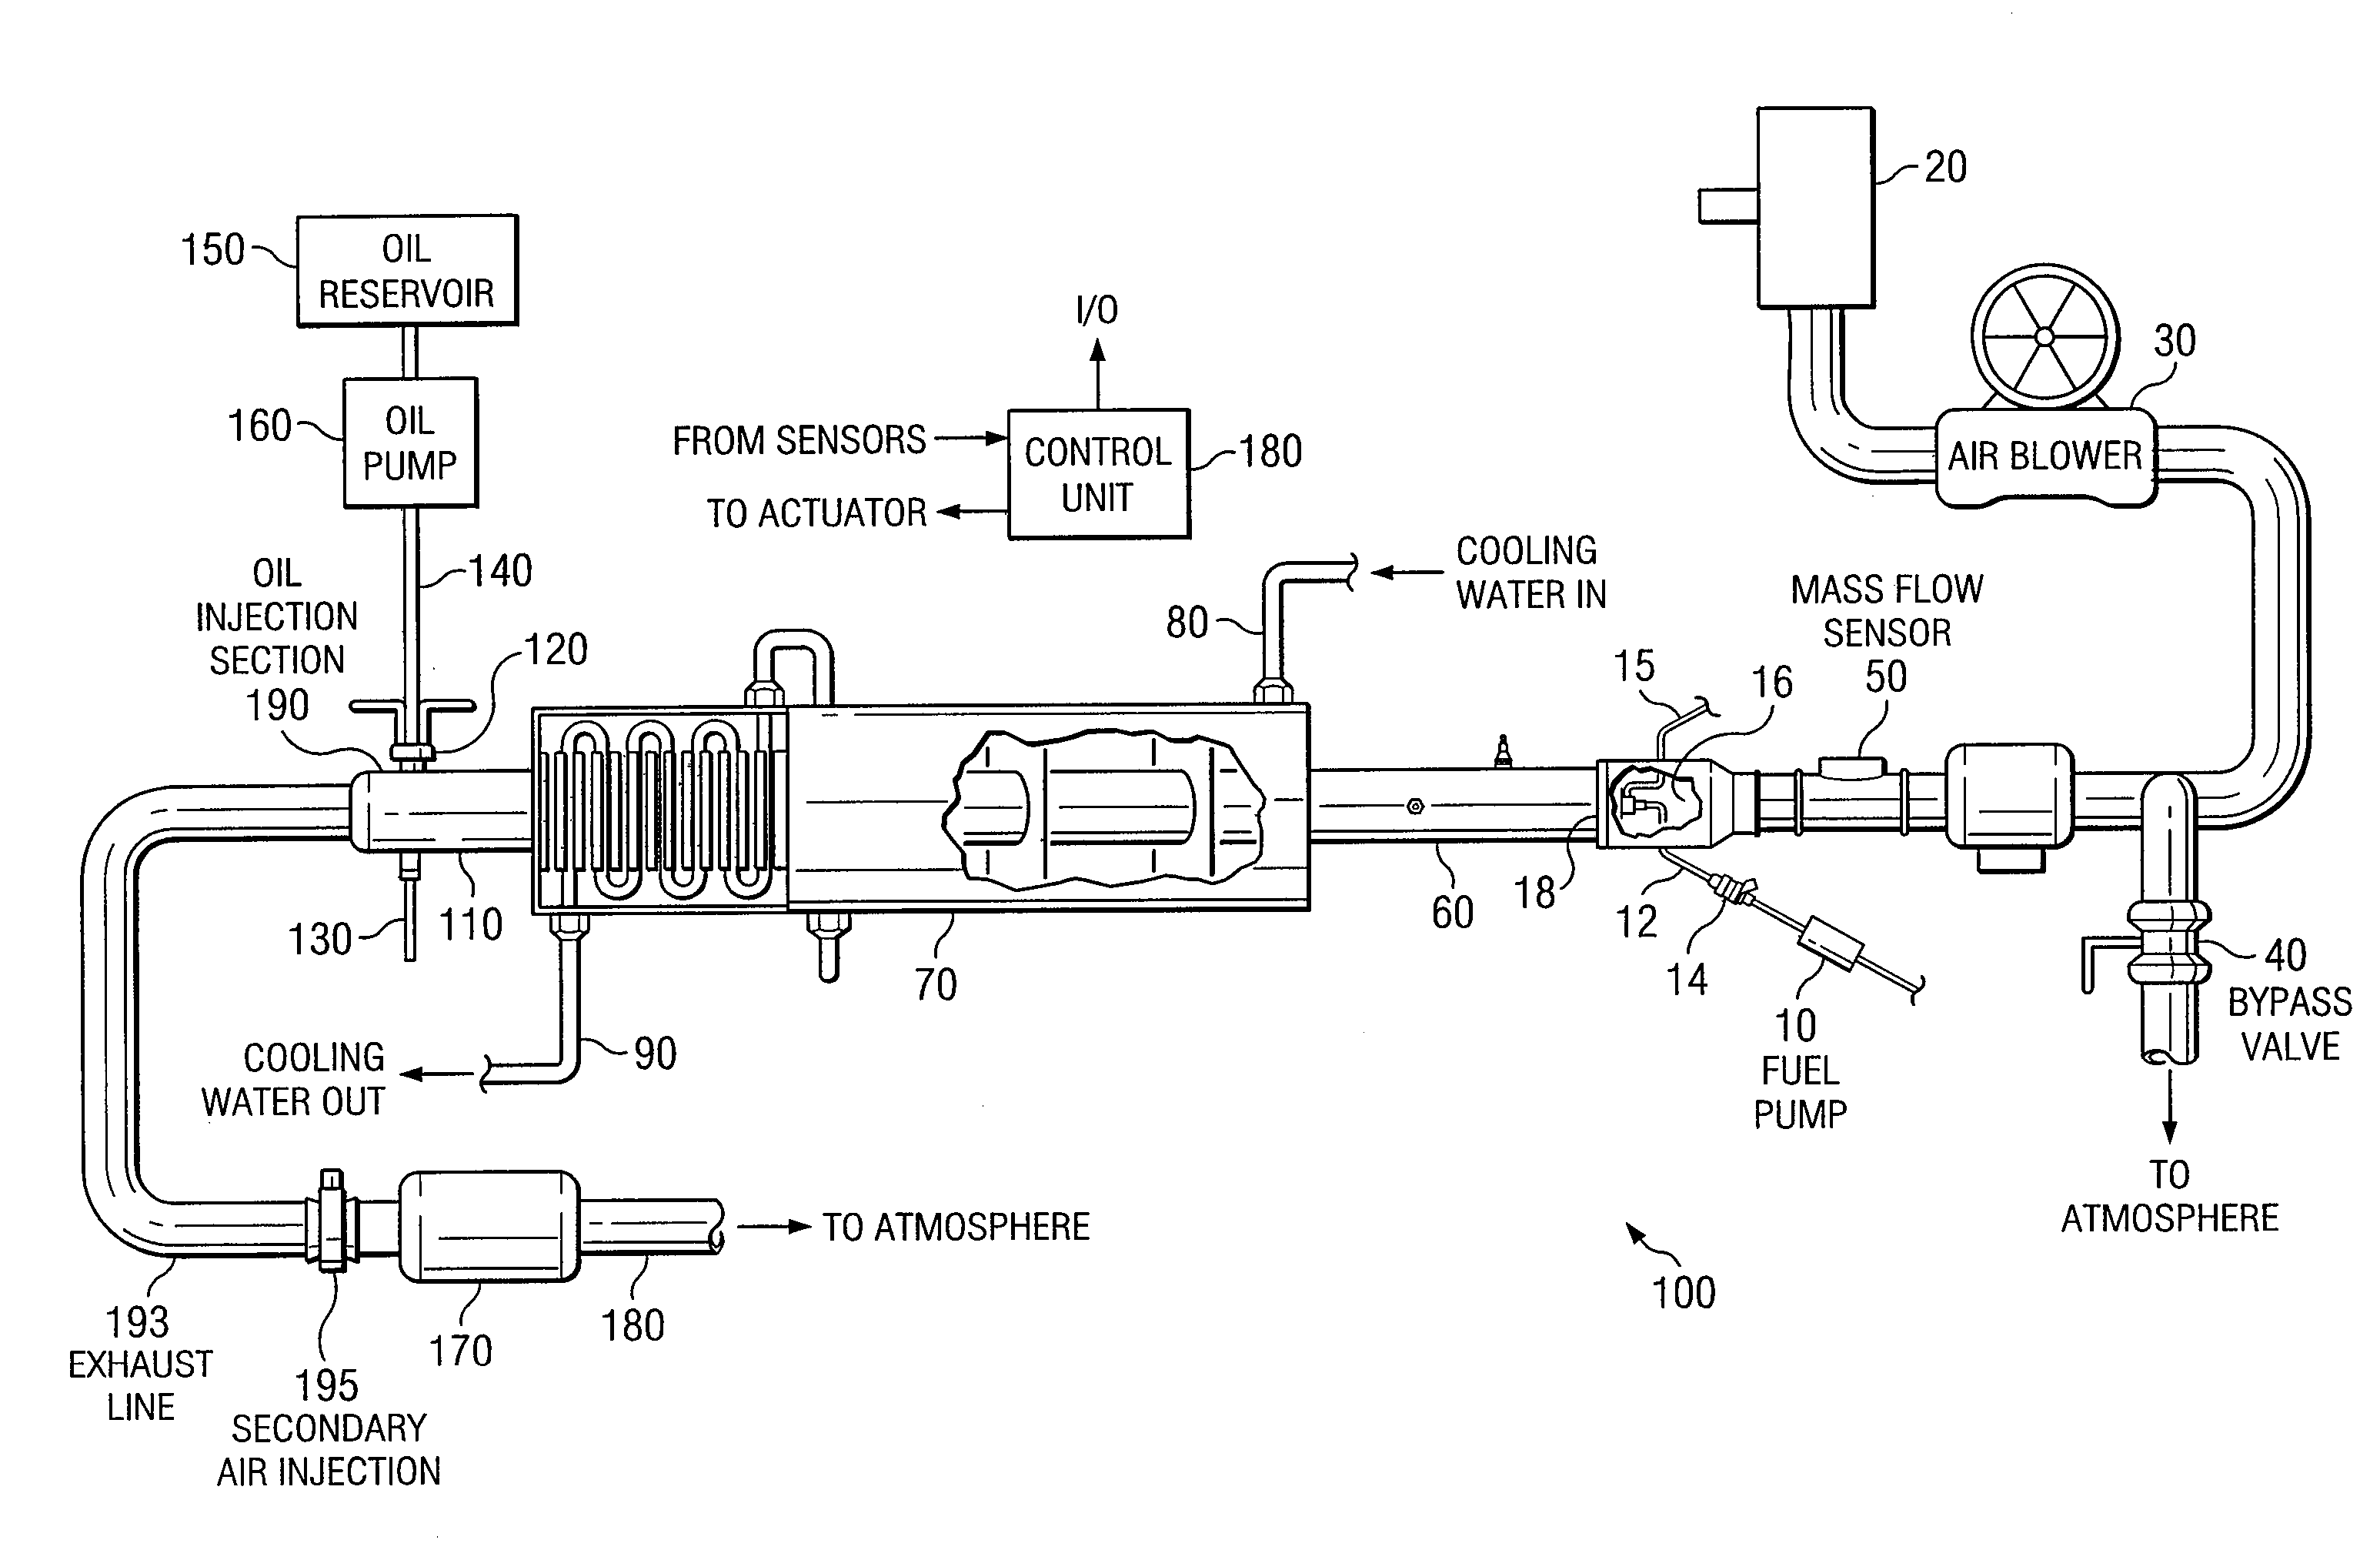 Secondary Air Injector For Use With Exhaust Gas Simulation System